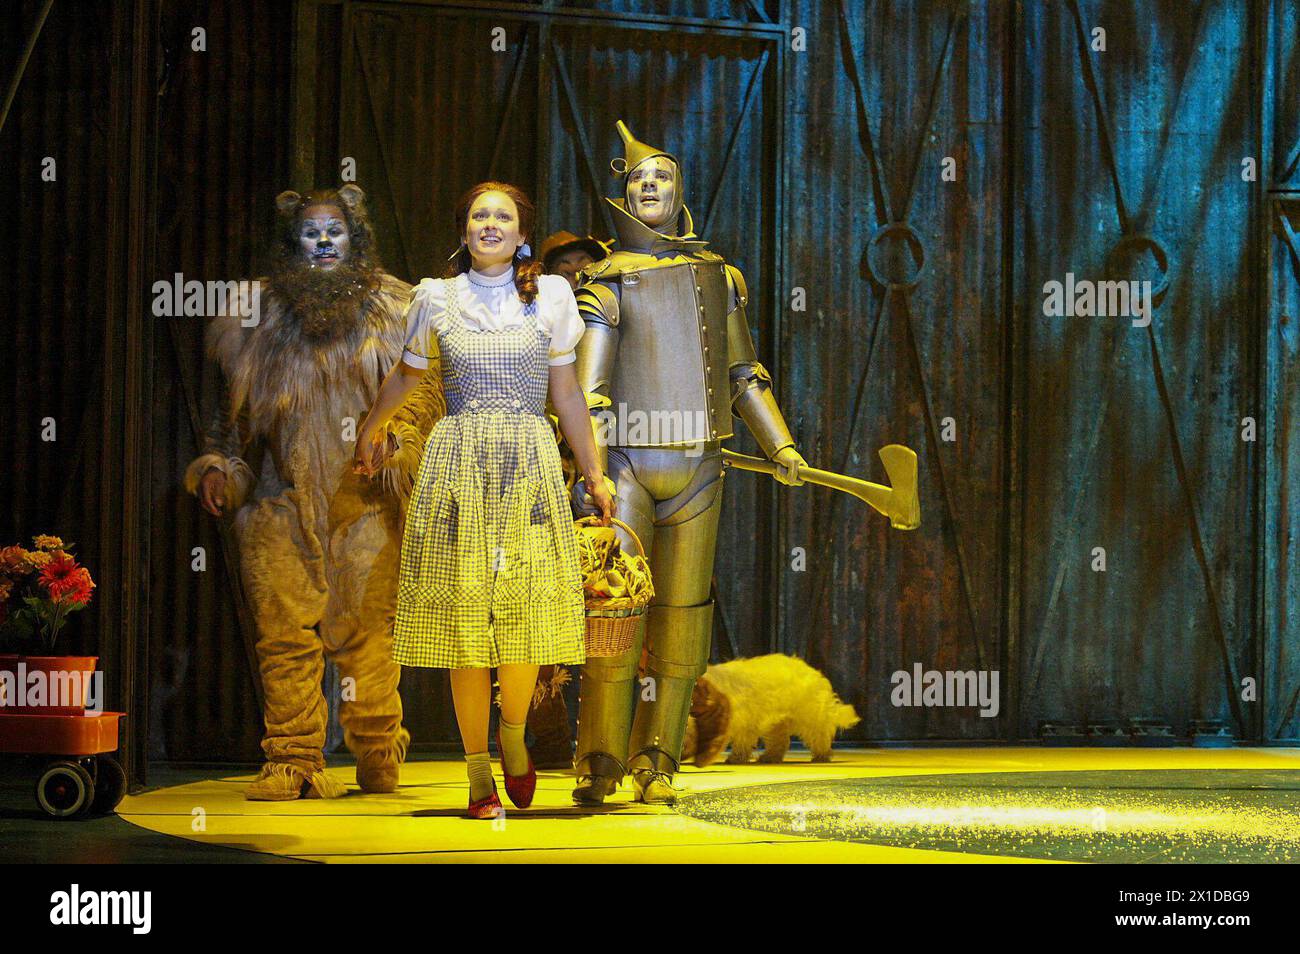 'Follow the yellow brick road' - l-r: Gary Wilmot (Cowardly Lion), Sian Brooke (Dorothy), Adam Cooper (Tin Man) with Bobby as 'Toto' in THE WIZARD OF OZ at the Royal Festival Hall, Southbank Centre, London SE1  29/07/2008 after the novel by by L. Frank Baum  music & lyrics: Harold Arlen & E. Y. Harburg   adapted by John Kane for the RSC  design: Michael Vale  lighting: Mike Gunning  choreography: Nick Winston  director: Jude Kelly  Royal Festival Hall (RFH), Southbank Centre, London SE1    29/07/2008 Stock Photo